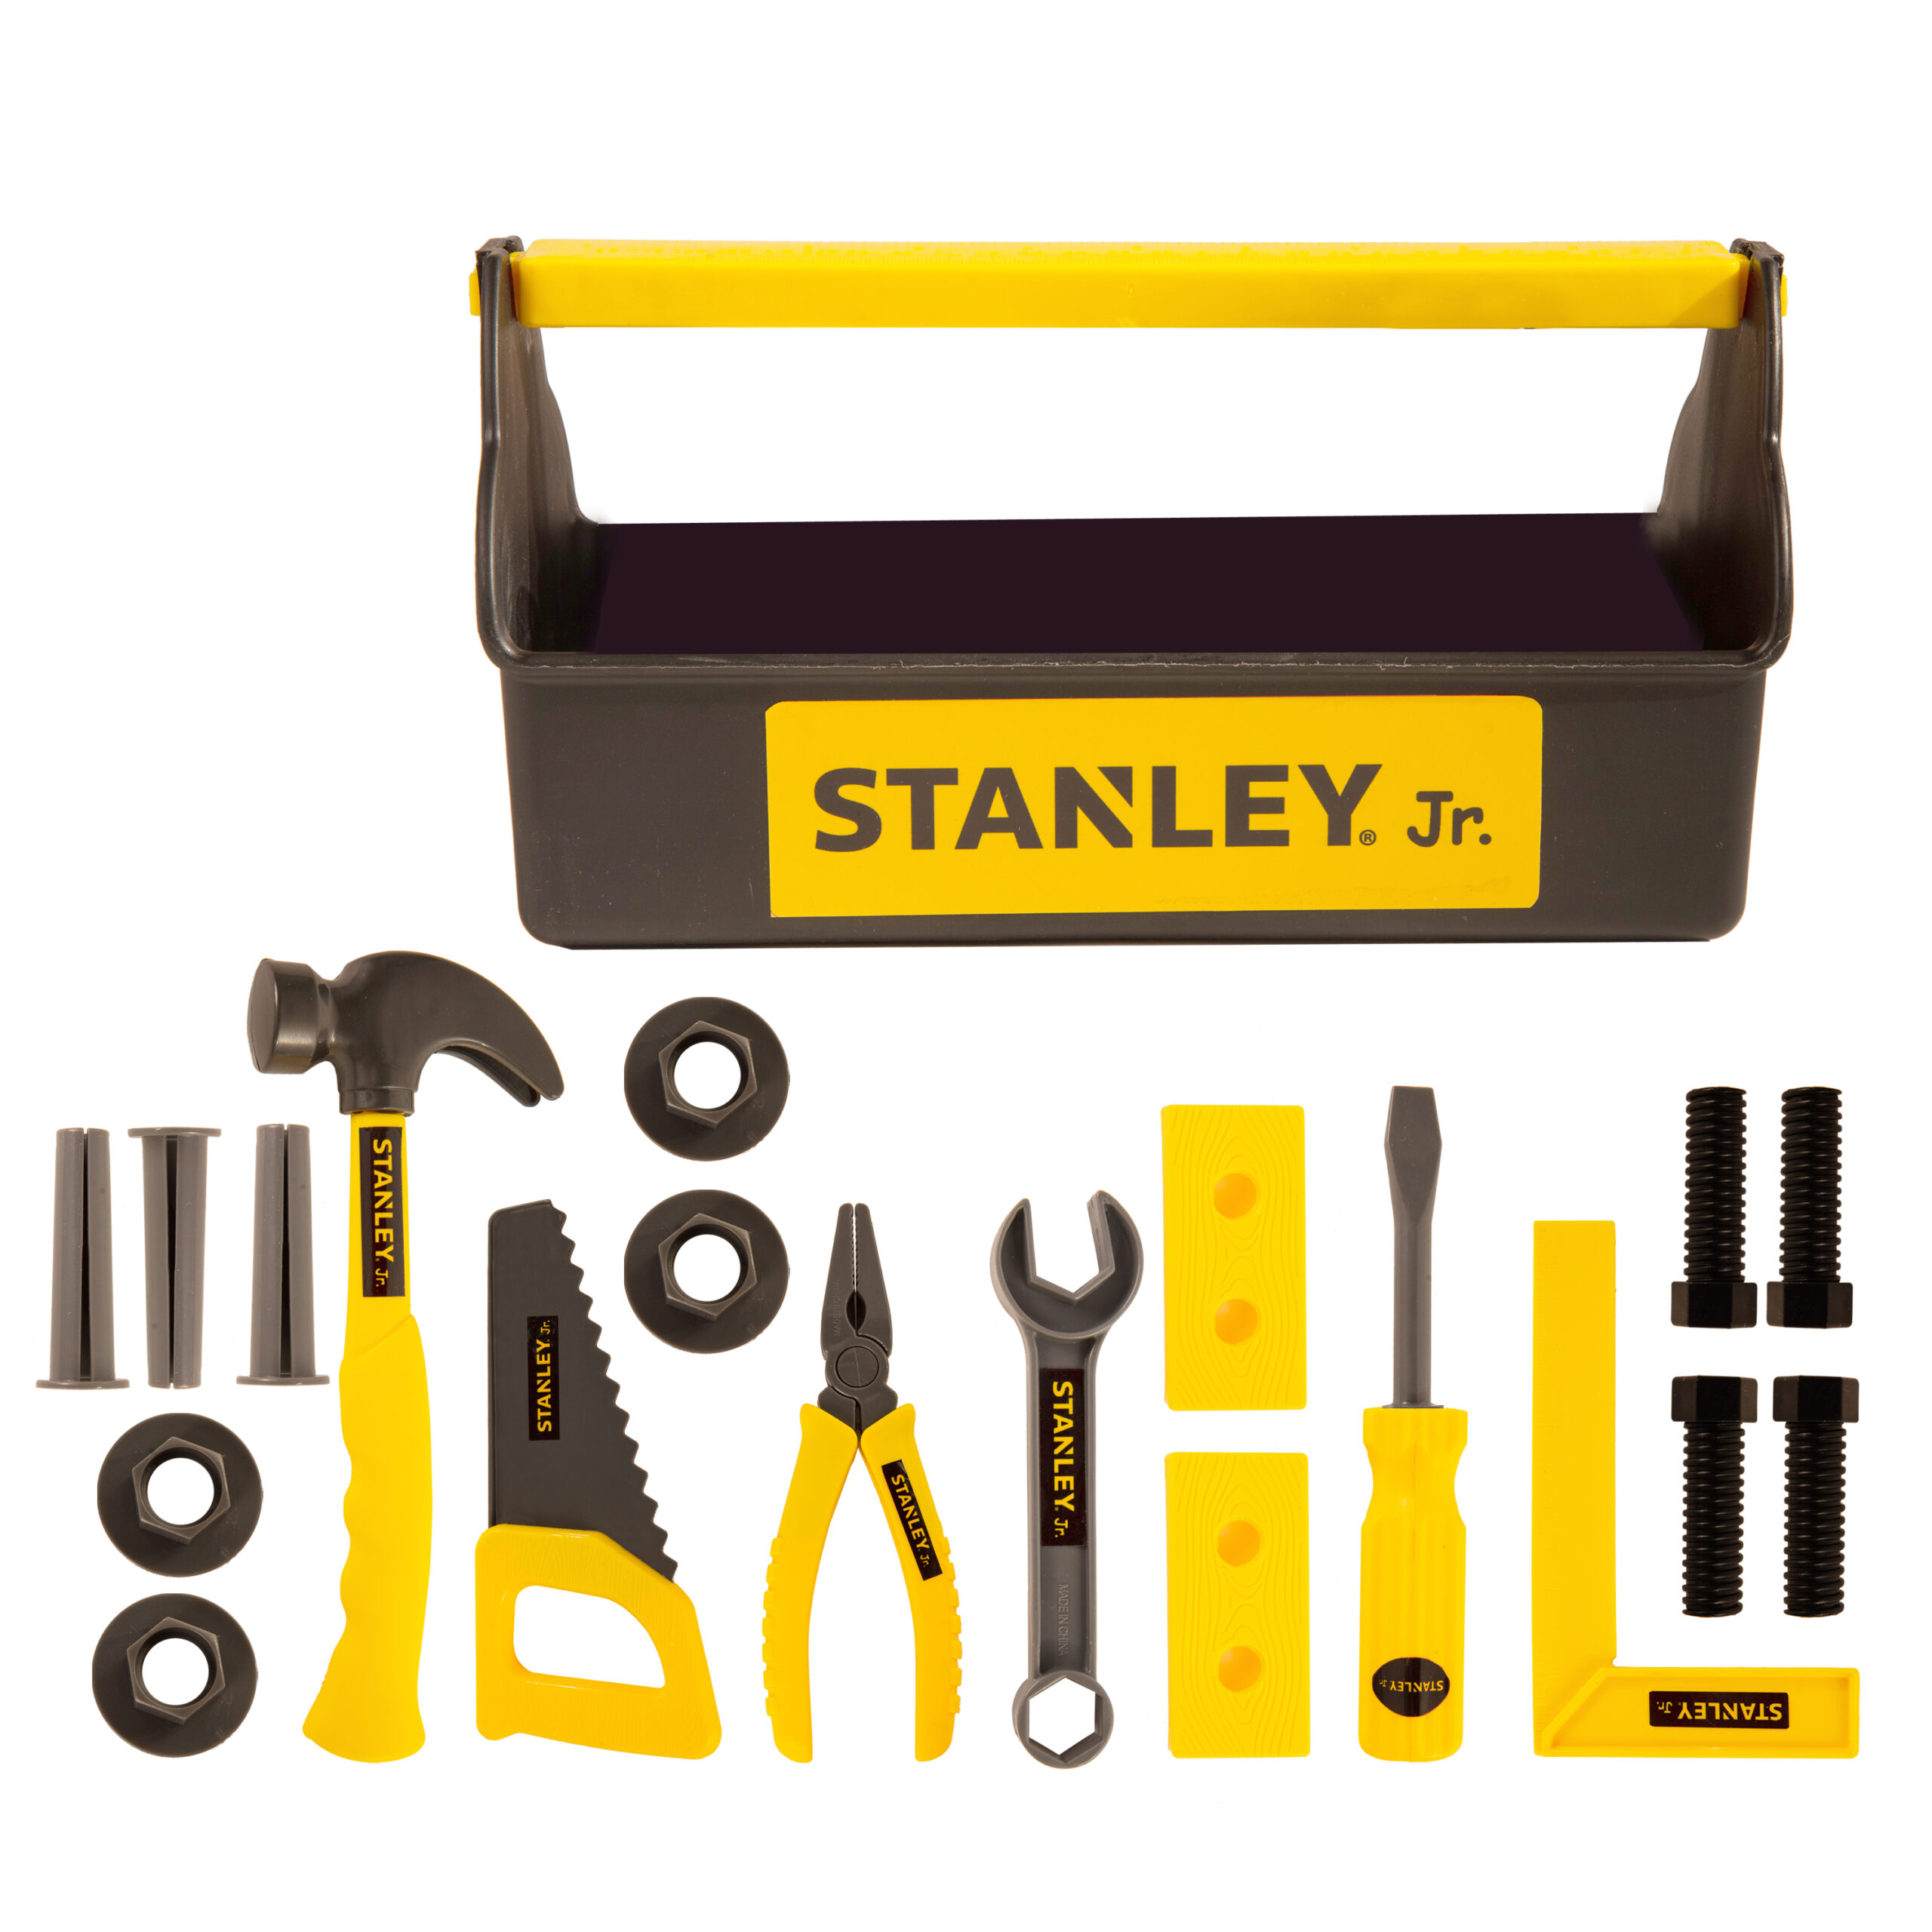 Stanley Jr. Play Tool Set - Castle Toys – The Red Balloon Toy Store